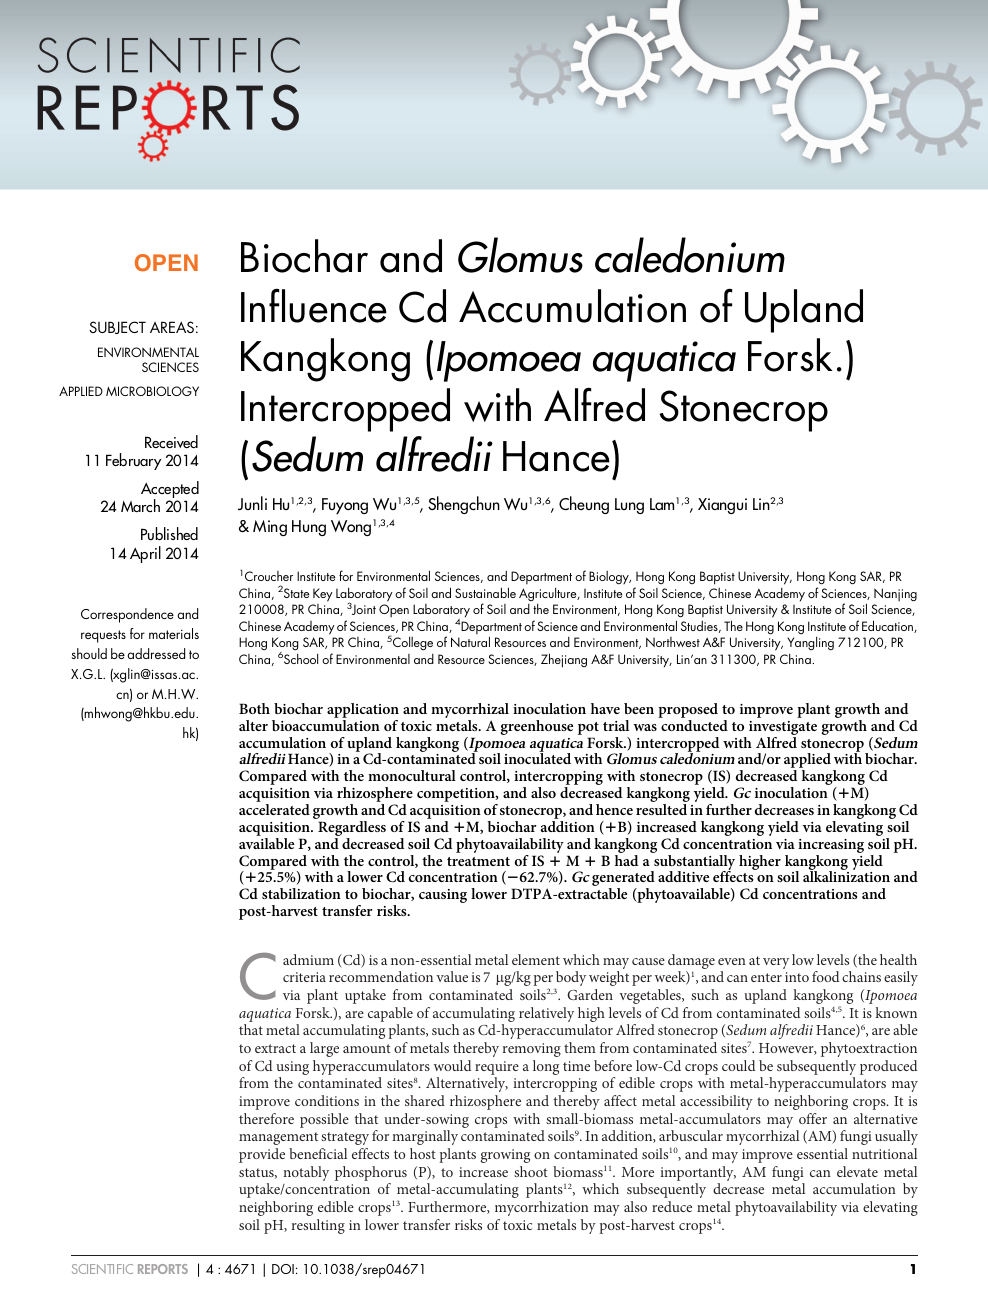 Biochar And Glomus Caledonium Influence Cd Accumulation Of Upland Kangkong Ipomoea Aquatica Forsk Intercropped With Alfred Stonecrop Sedum Alfredii Hance Topic Of Research Paper In Biological Sciences Download Scholarly Article Pdf